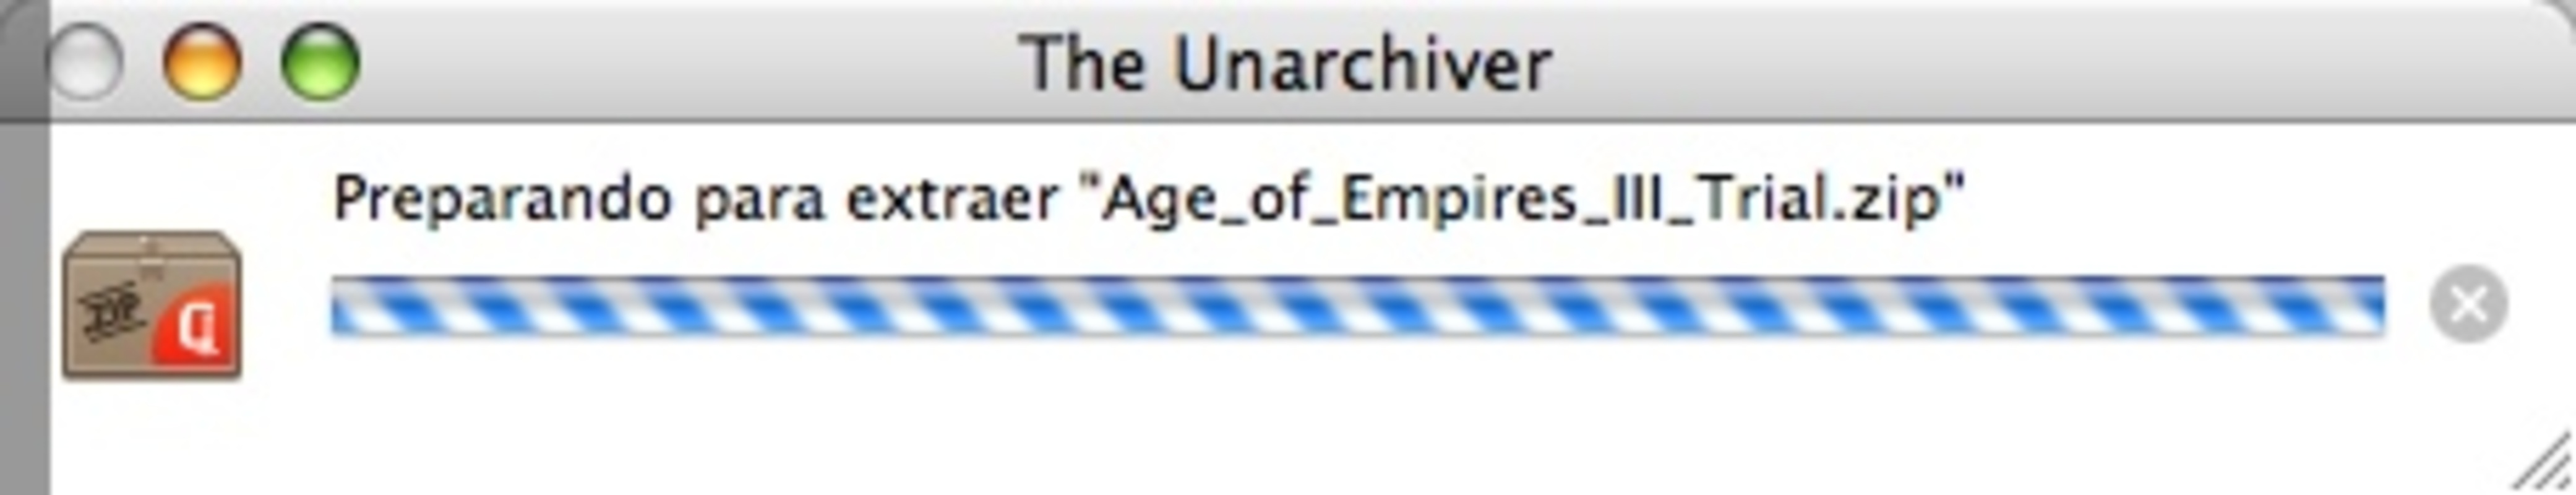 The Unarchiver 4.2.2 feature